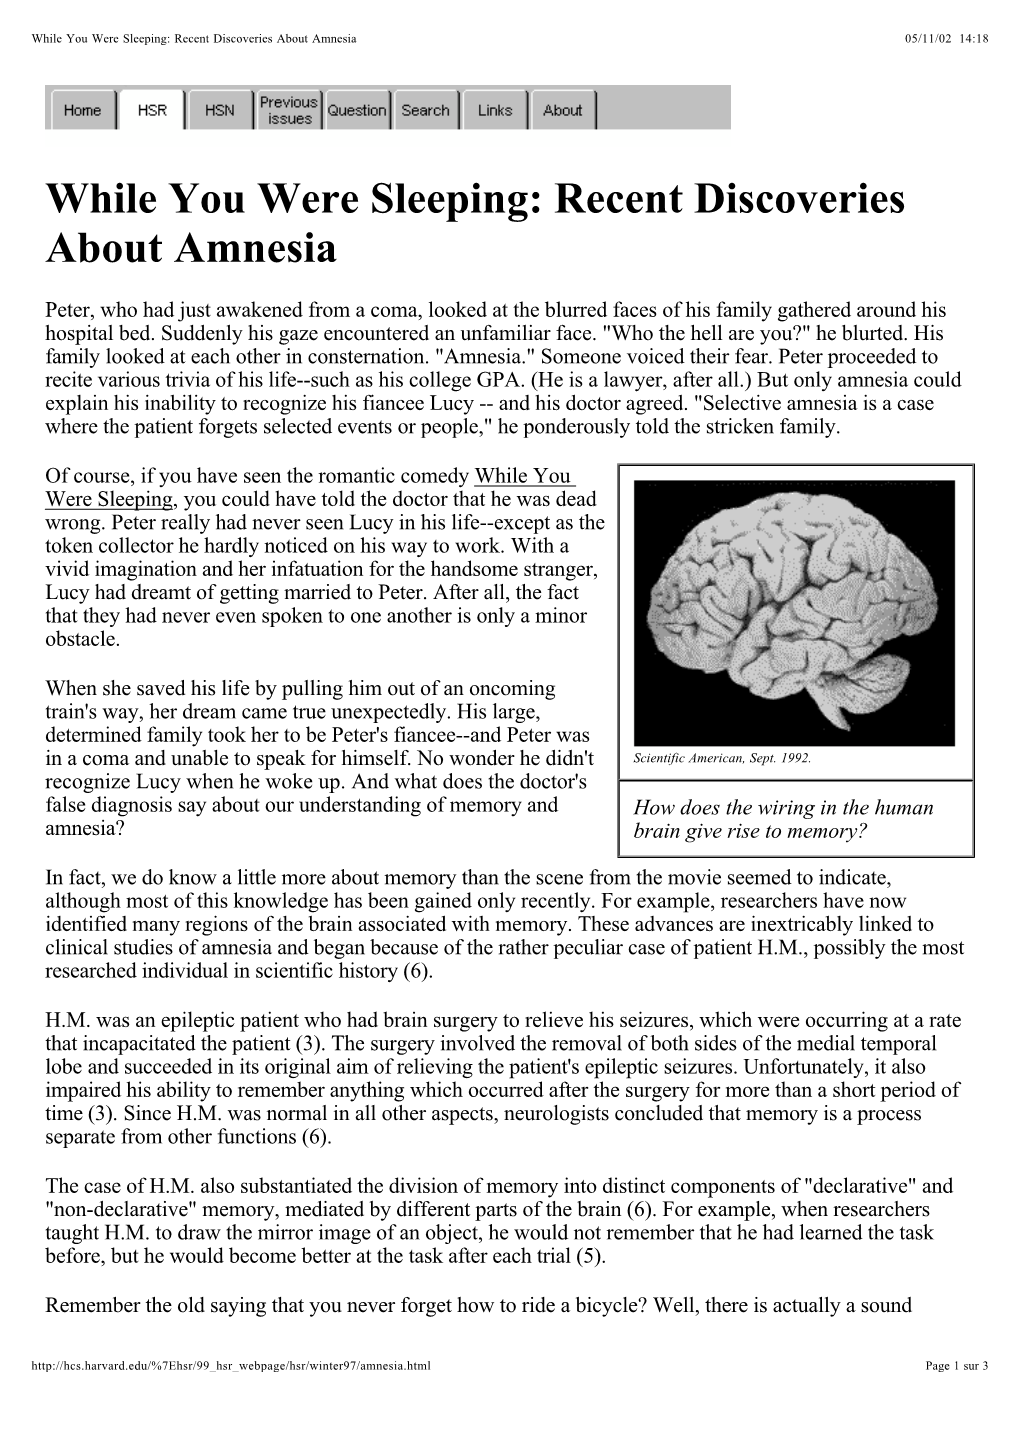 While You Were Sleeping: Recent Discoveries About Amnesia 05/11/02 14:18